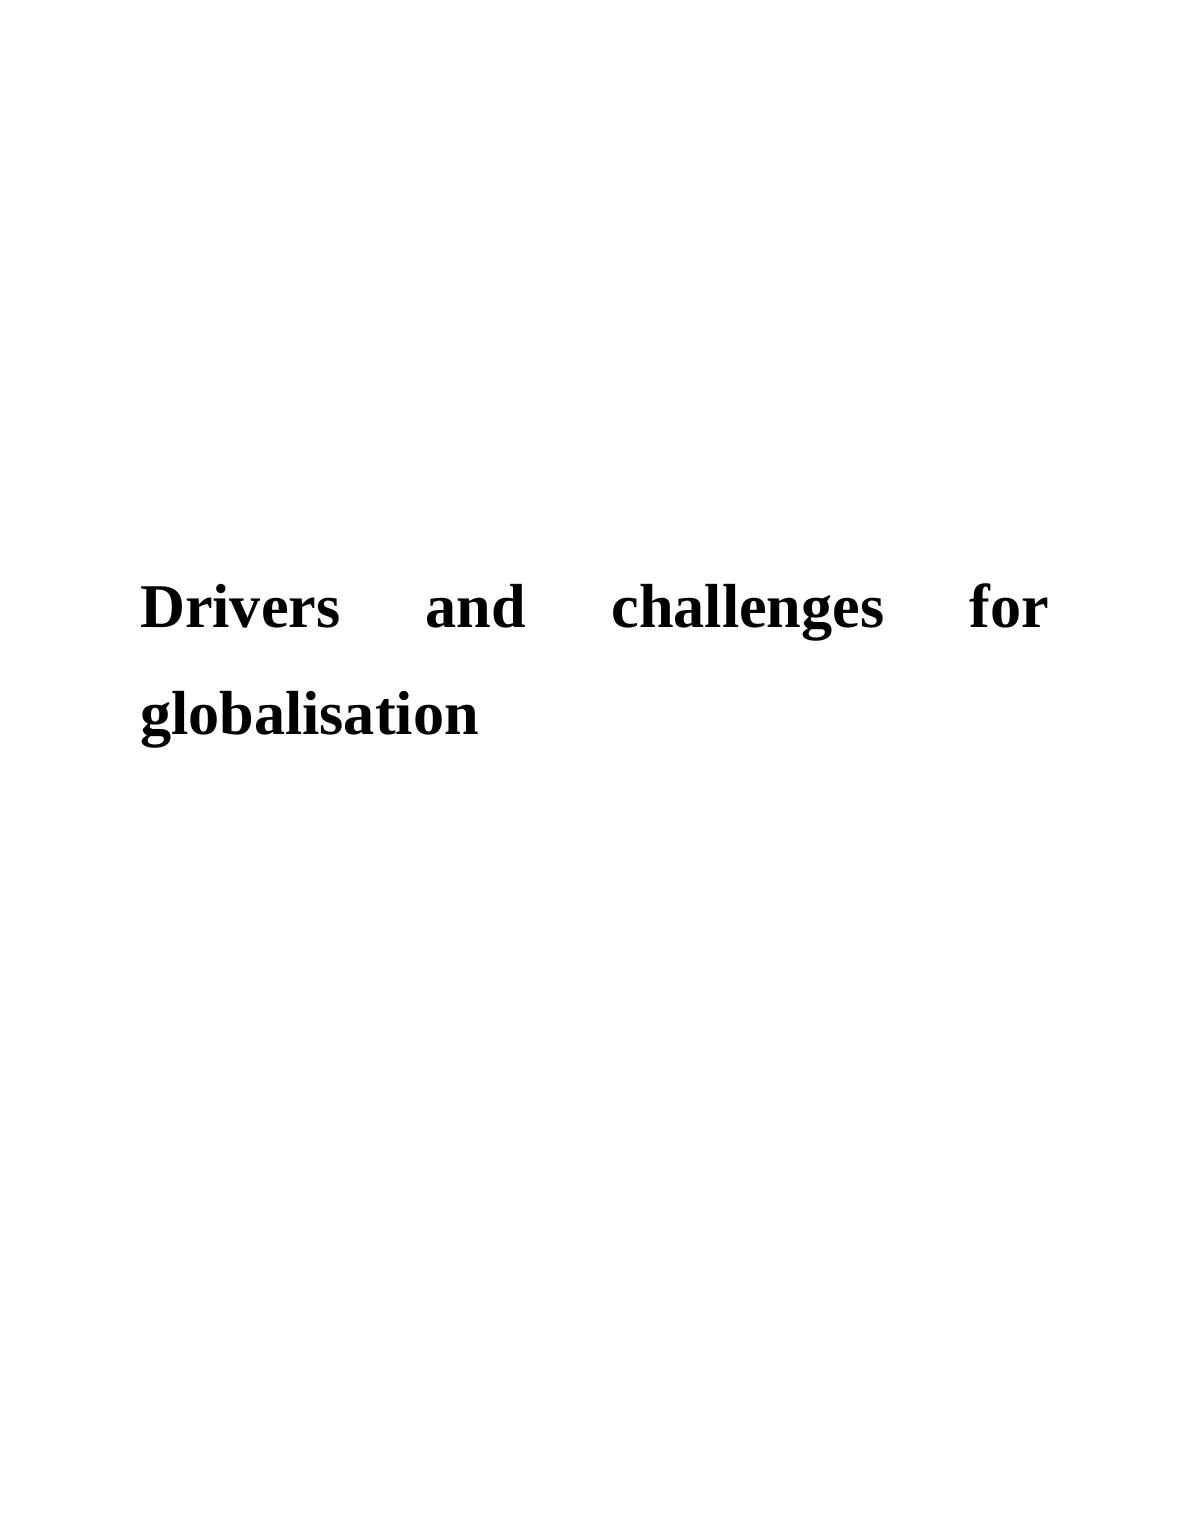 Drivers and Challenges for Globalisation Essay_1